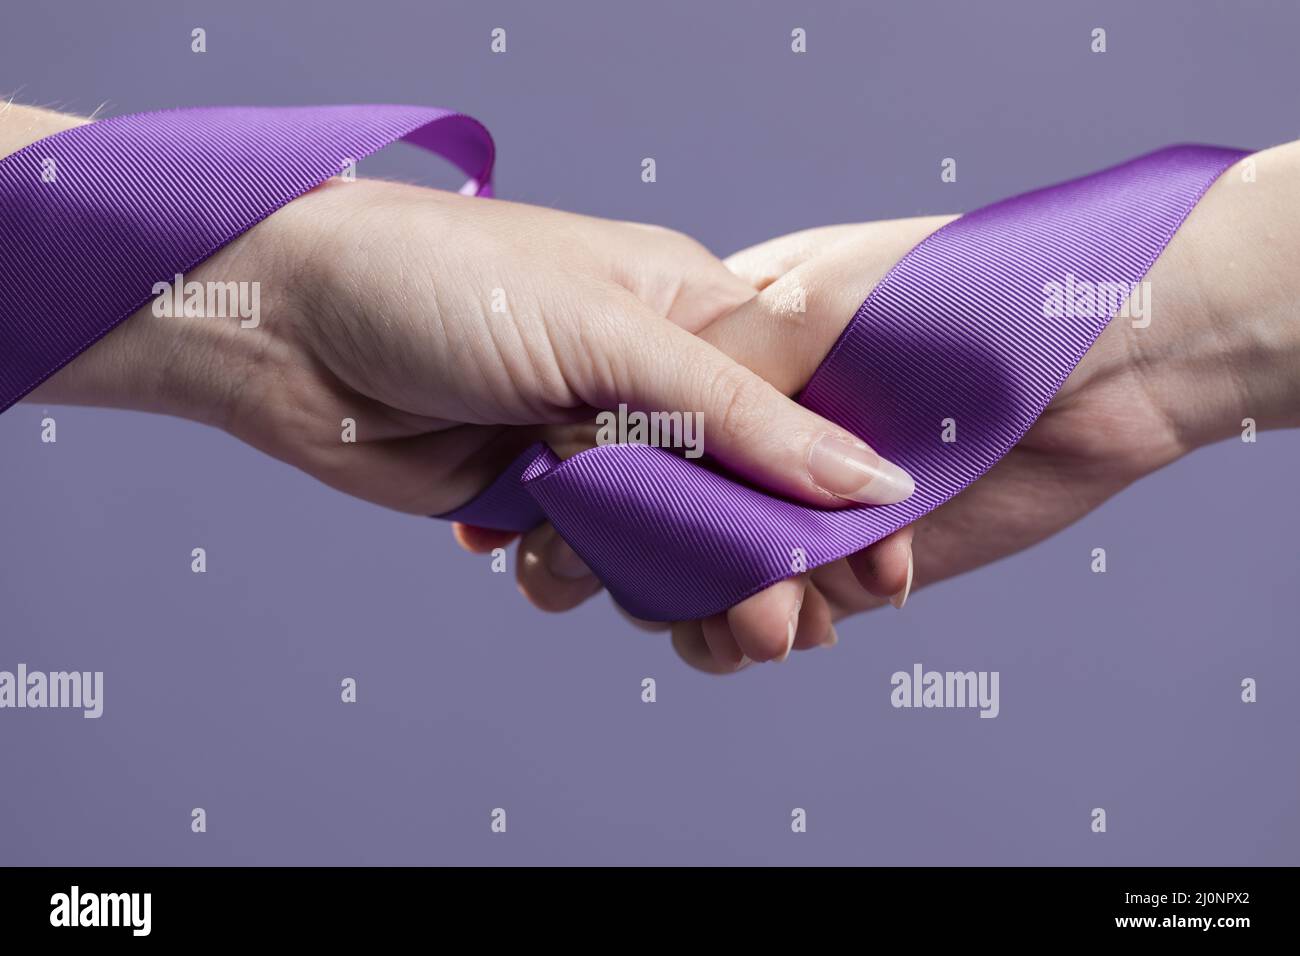 Women hands holding purple satin ribbon. High quality and resolution beautiful photo concept Stock Photo